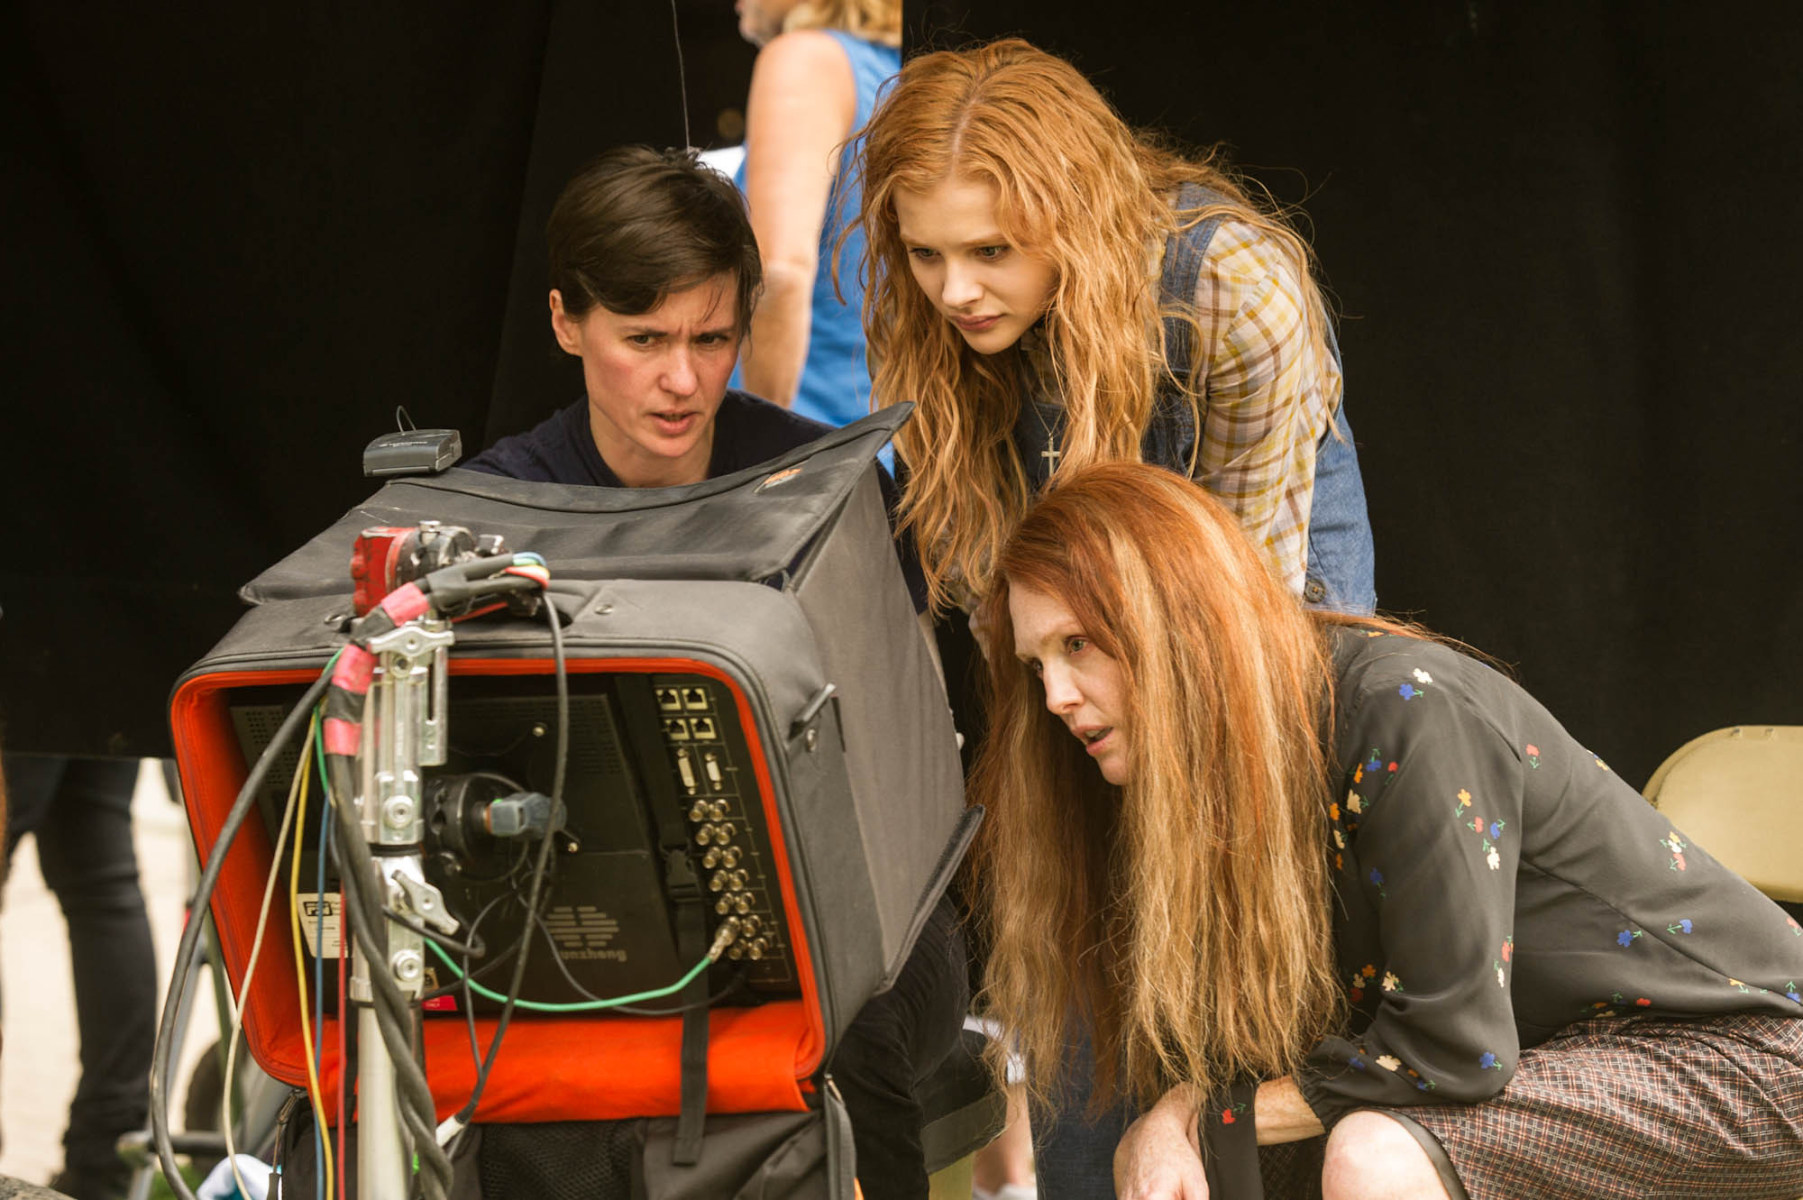 On Location : Carrie (2013) Behind the Scenes